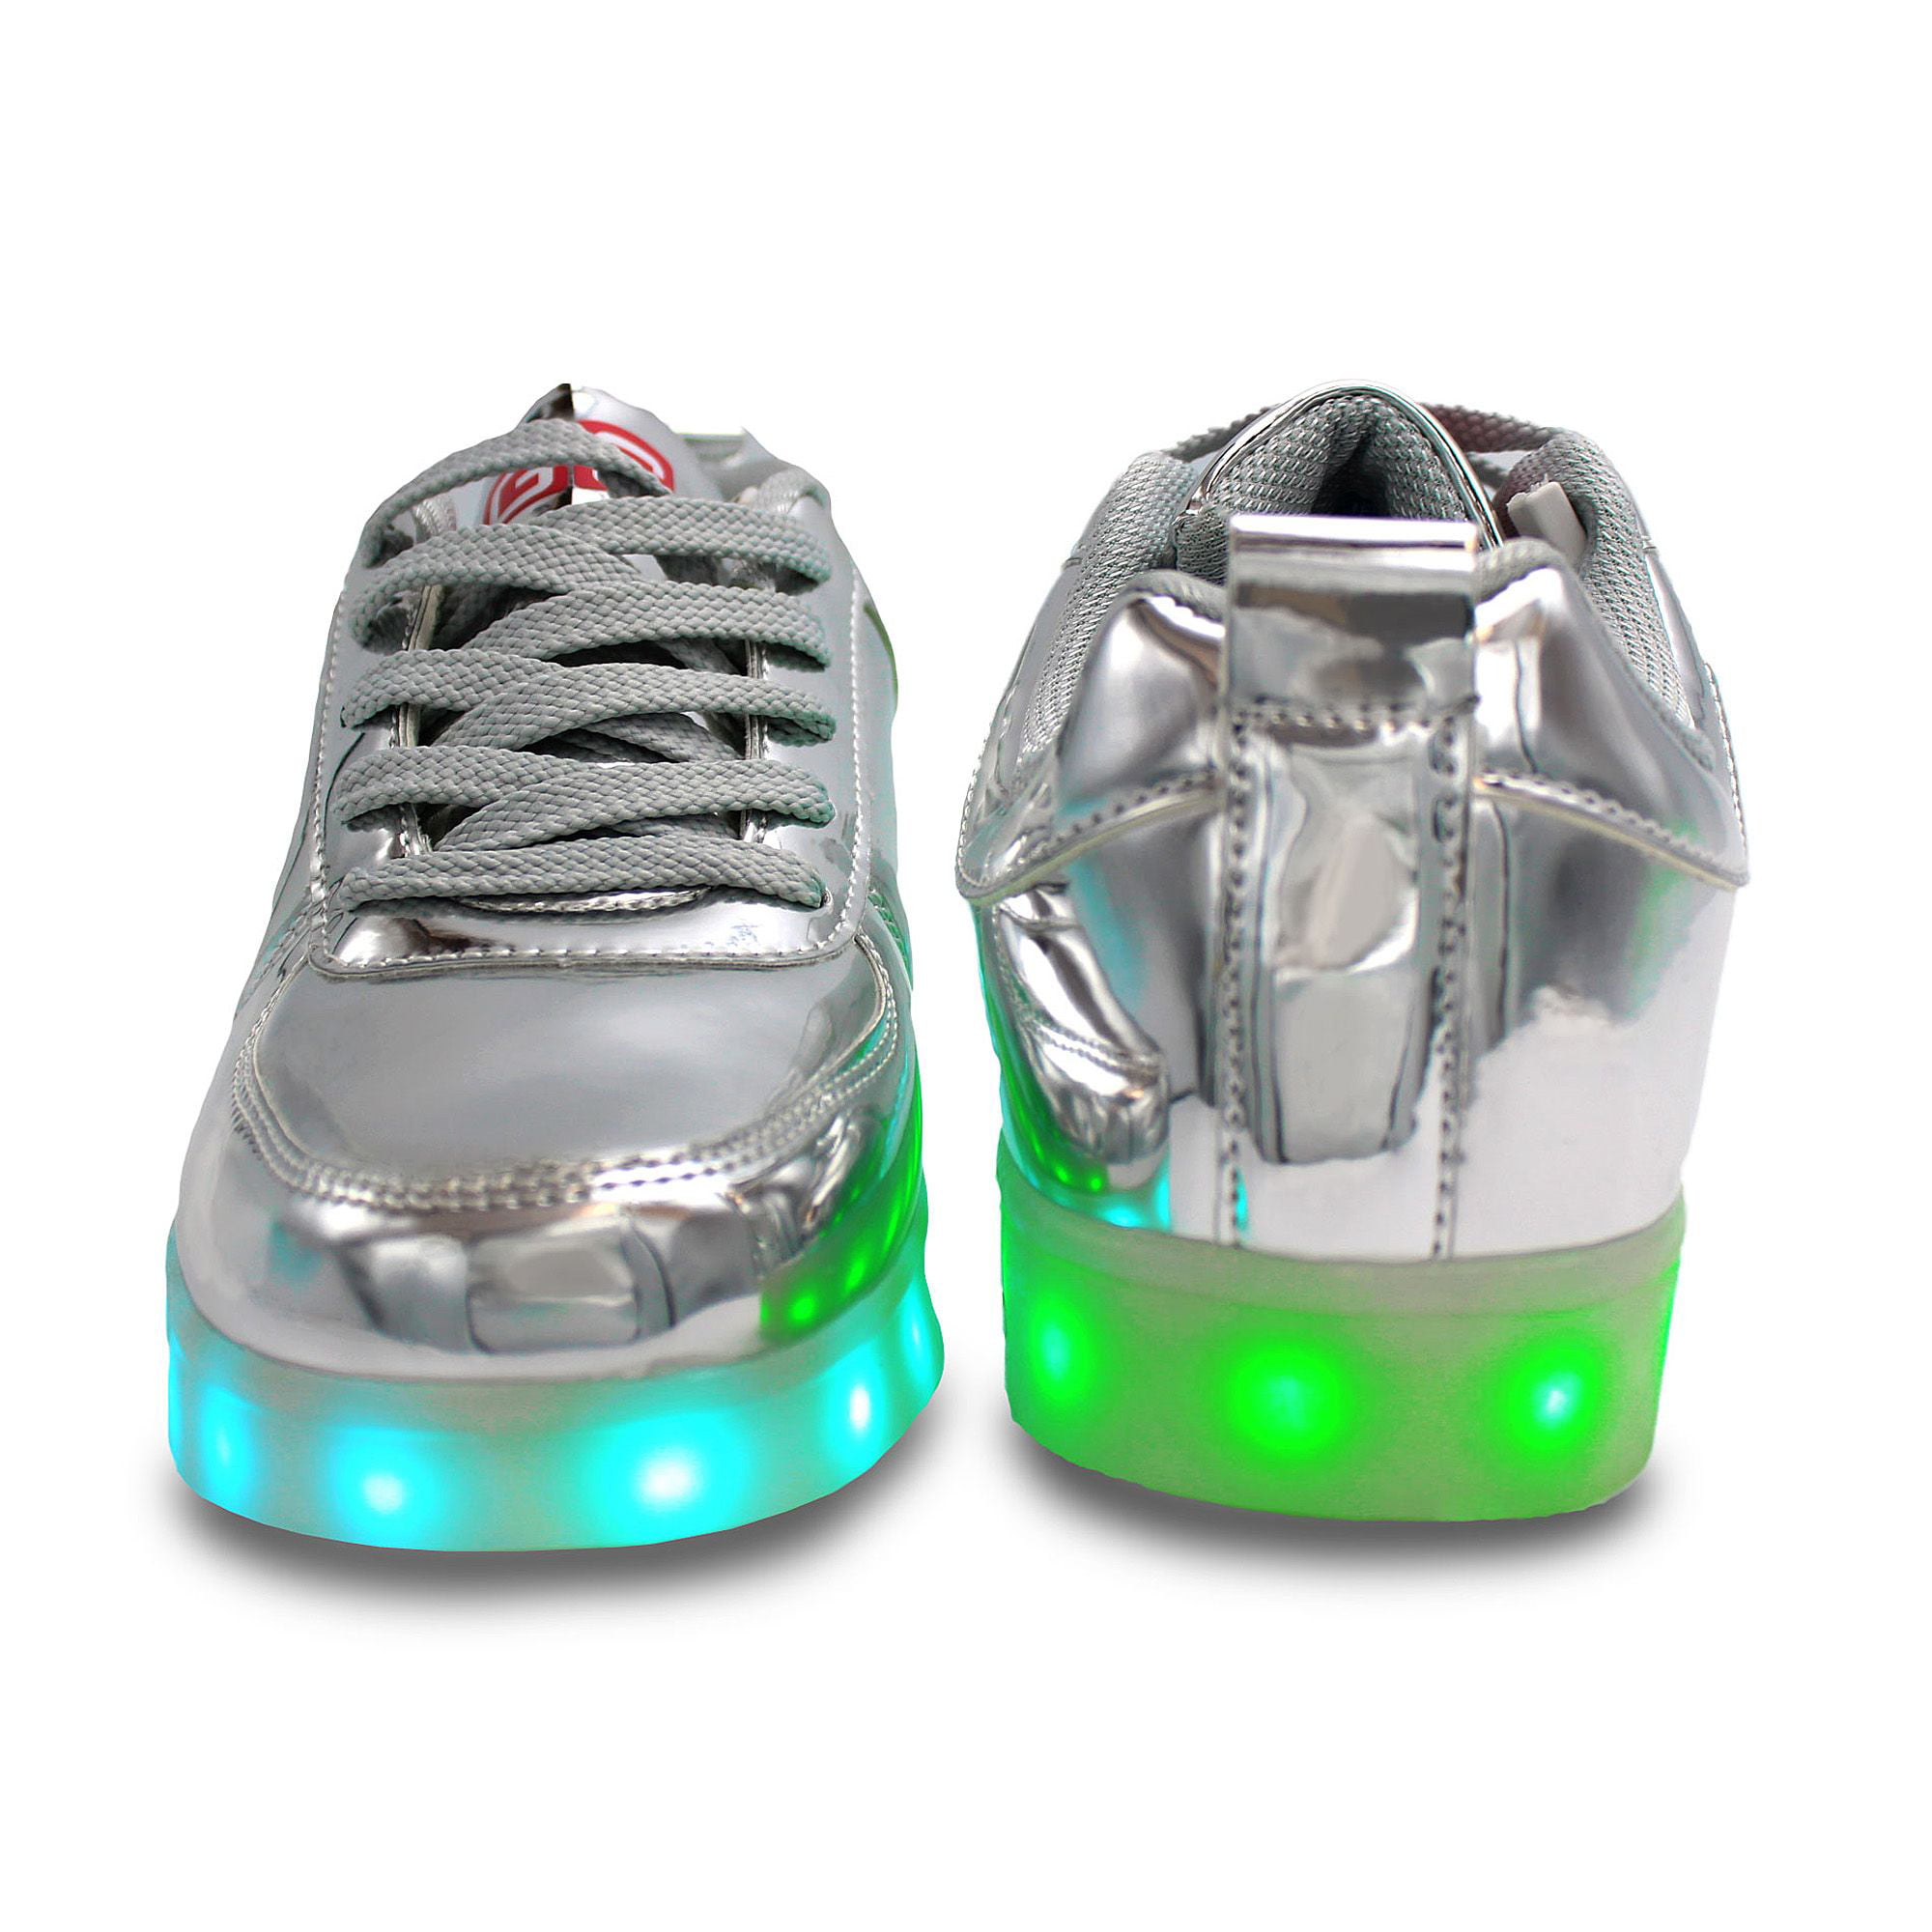 Family Smiles LED Light Up Sneakers Kids High Top USB Charging Boys Girls Unisex Lace Up Shoes Gold, Kids Unisex, Size: US10 / Eu27